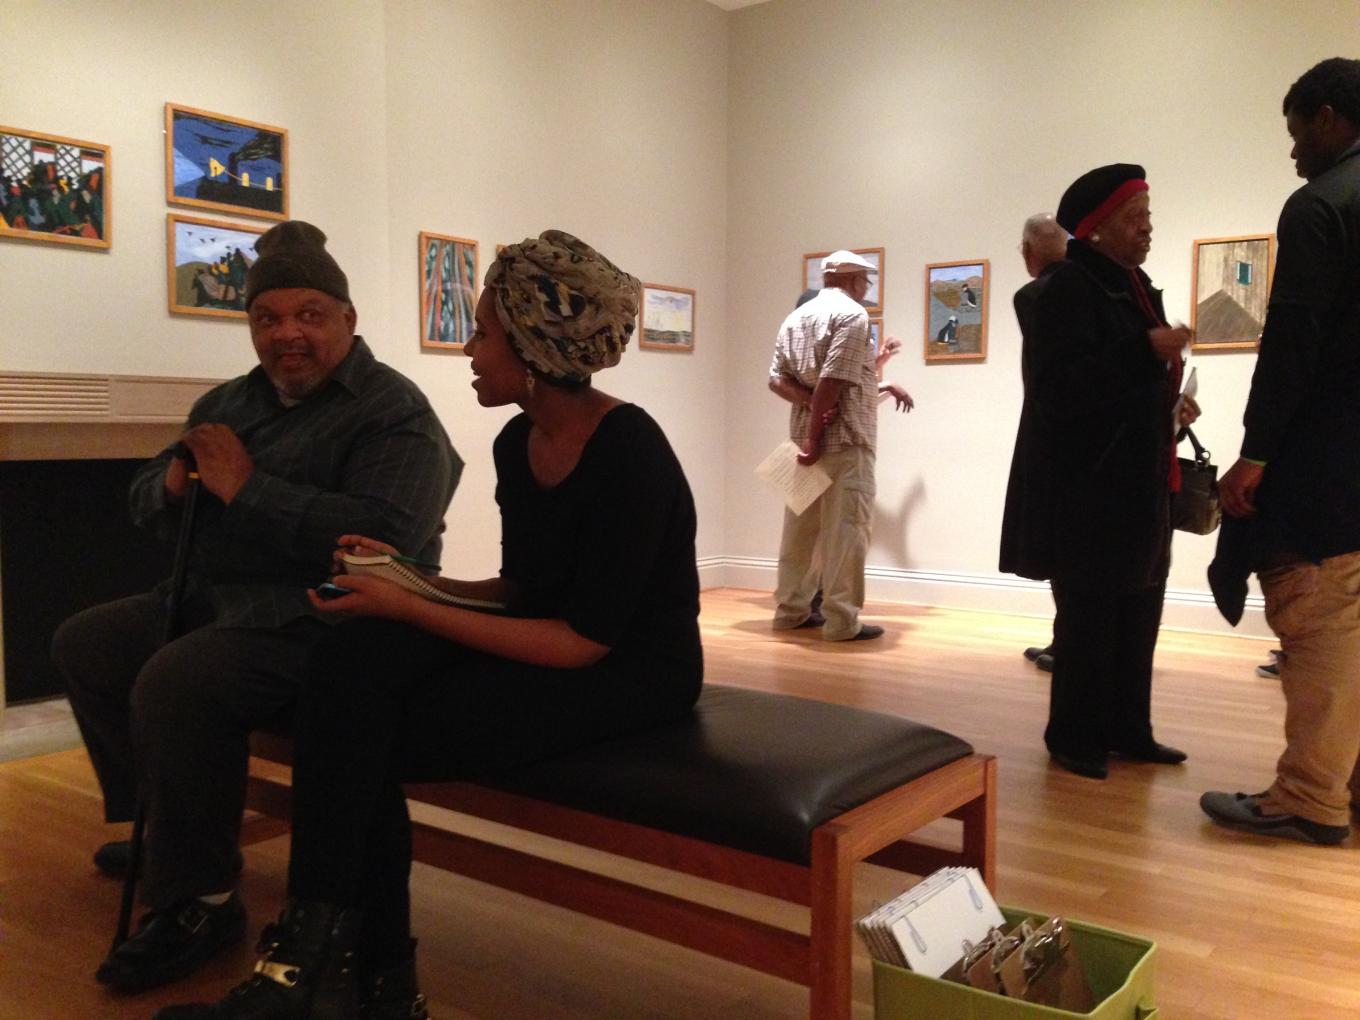 Students and elders discuss Jacob Lawrenceâs The Migration Series. Photo: Andrea Kim Taylor